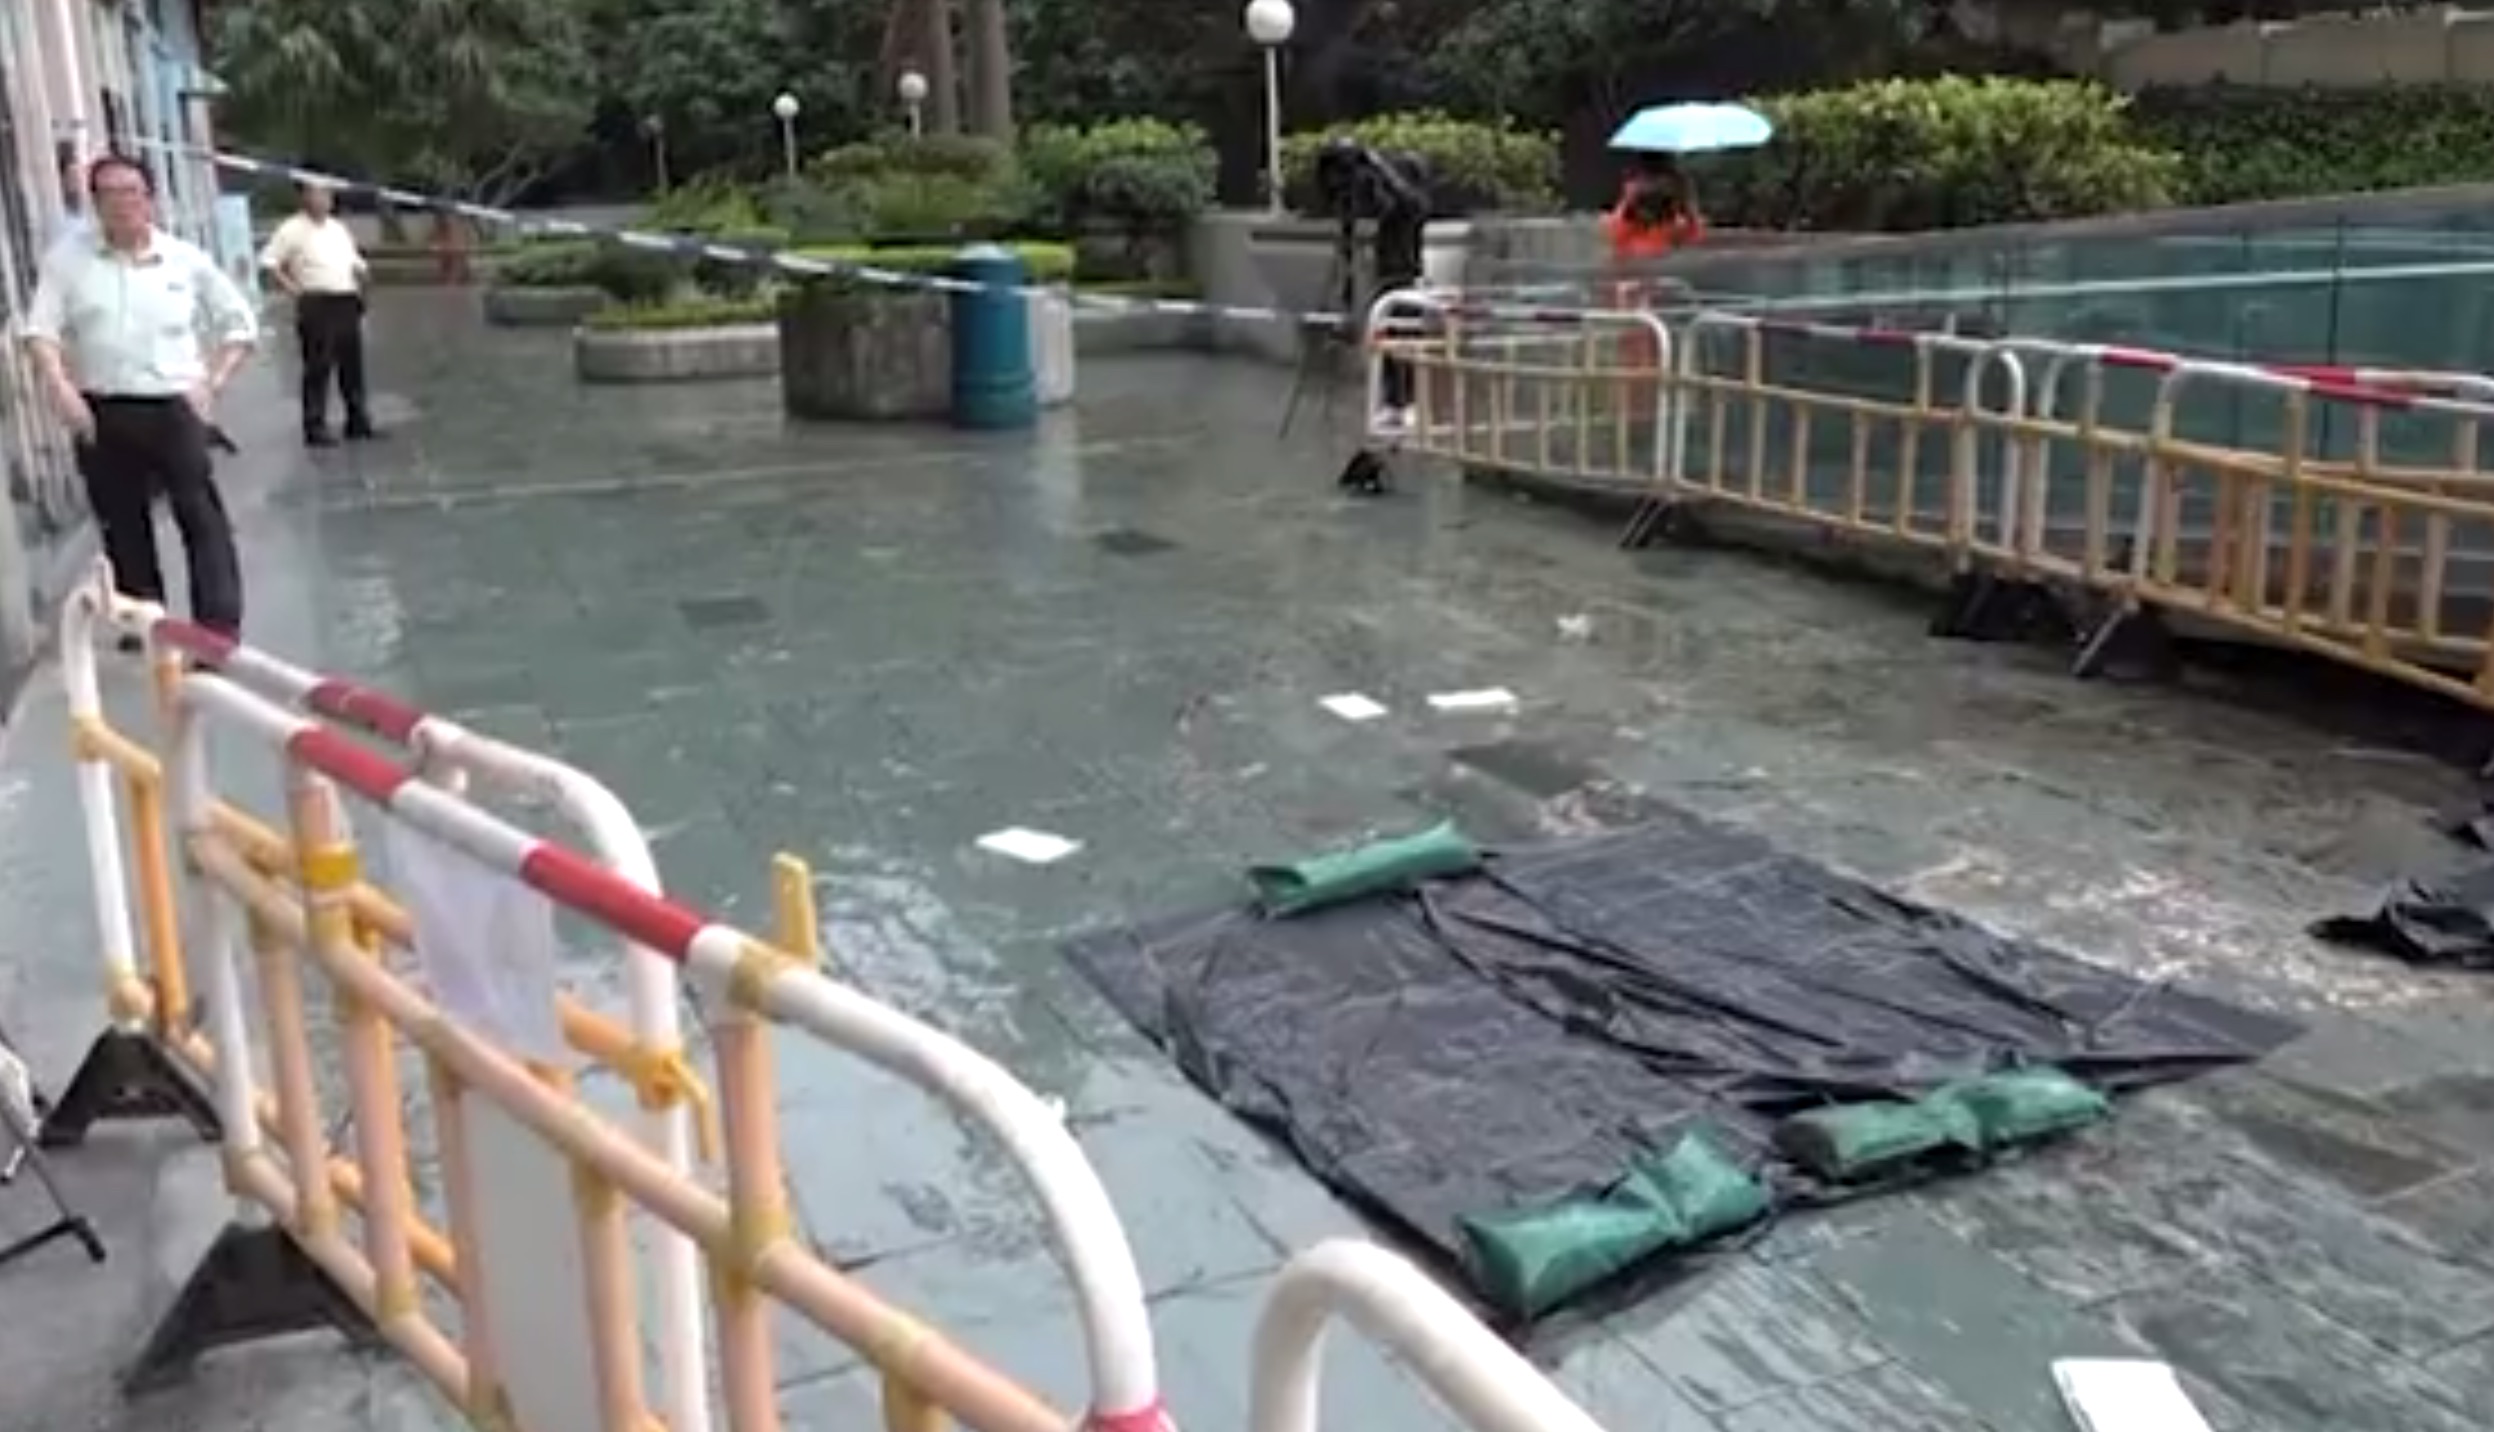 The scene where an elderly woman was killed by a falling metal part in Tsing Yi today. Screengrab via Apple Daily Video.